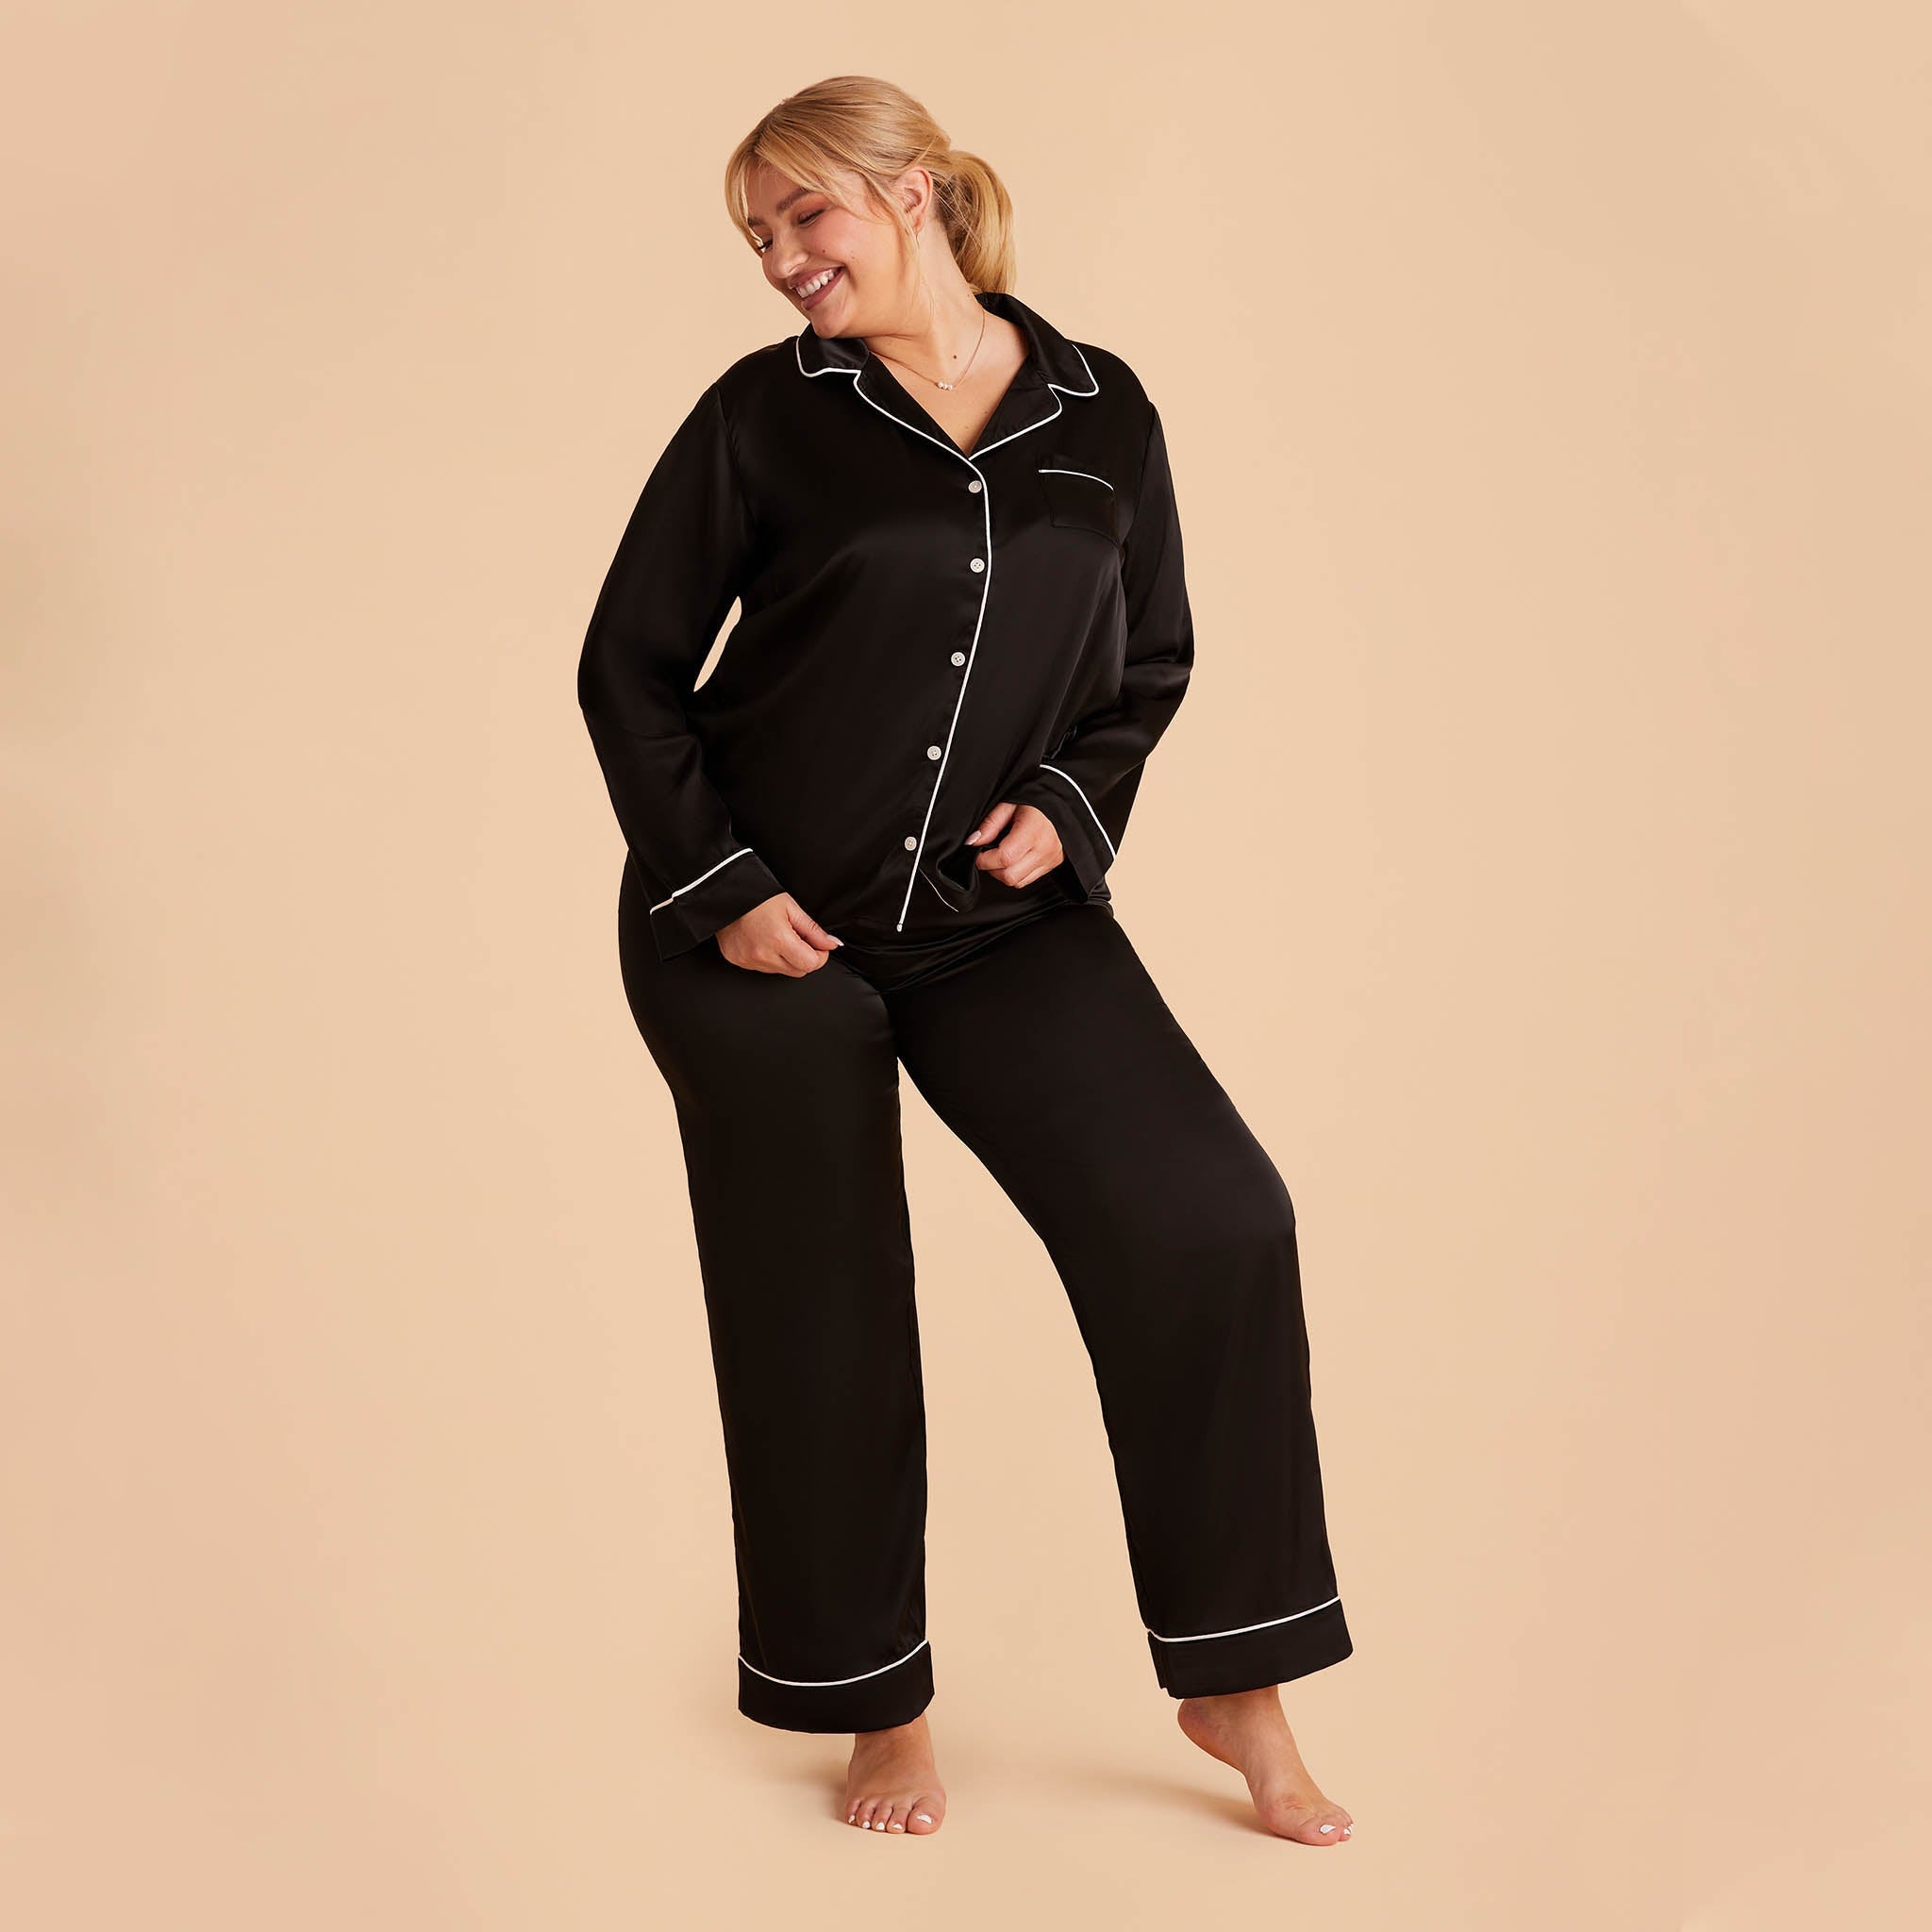 Jonny Plus Size Satin Long Sleeve Pajama Top With White Piping in black, front view